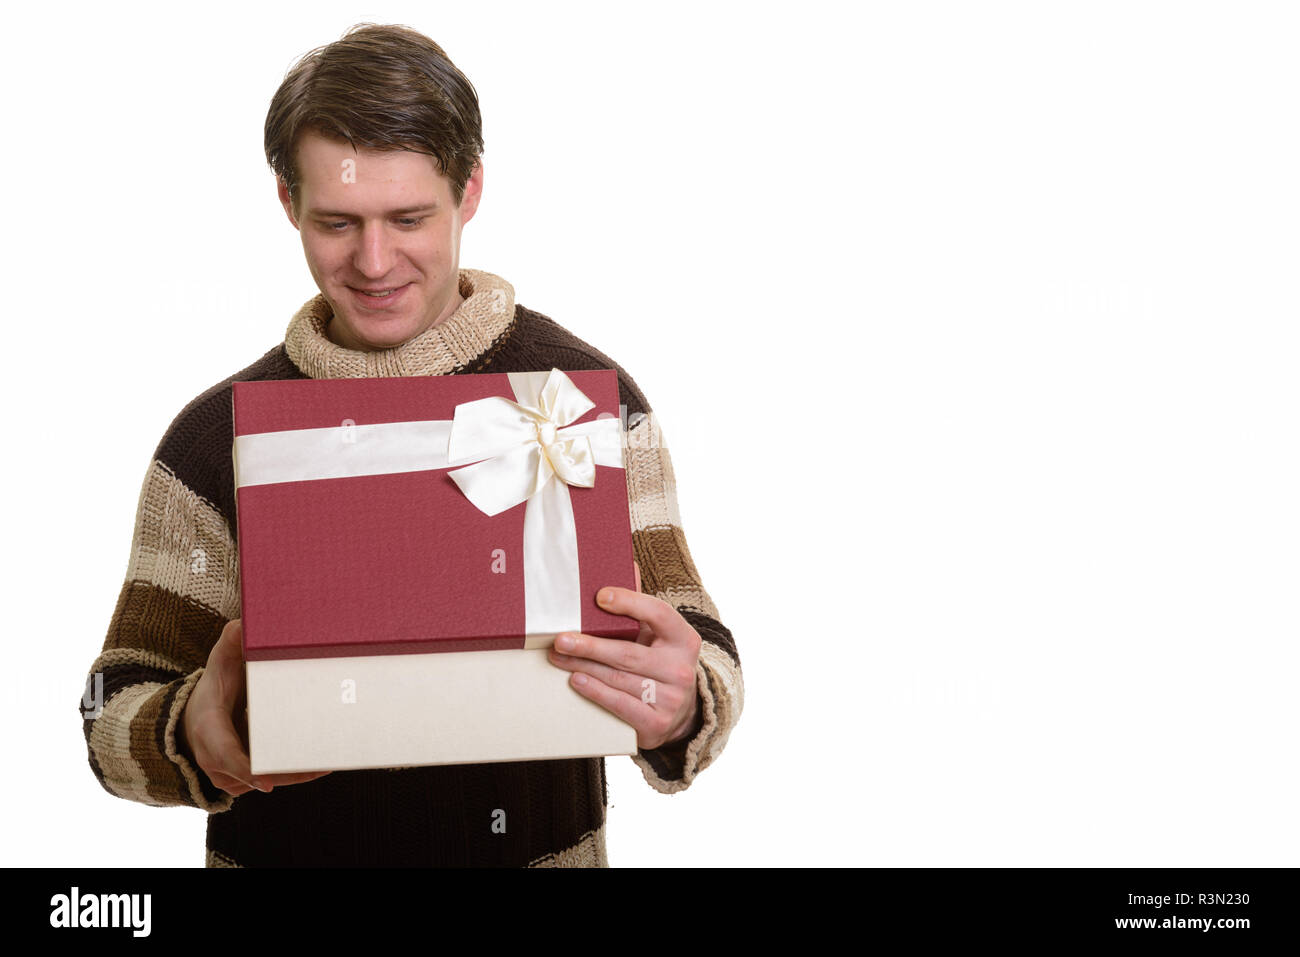 Happy handsome Young man opening gift box prêt pour Valentin Banque D'Images